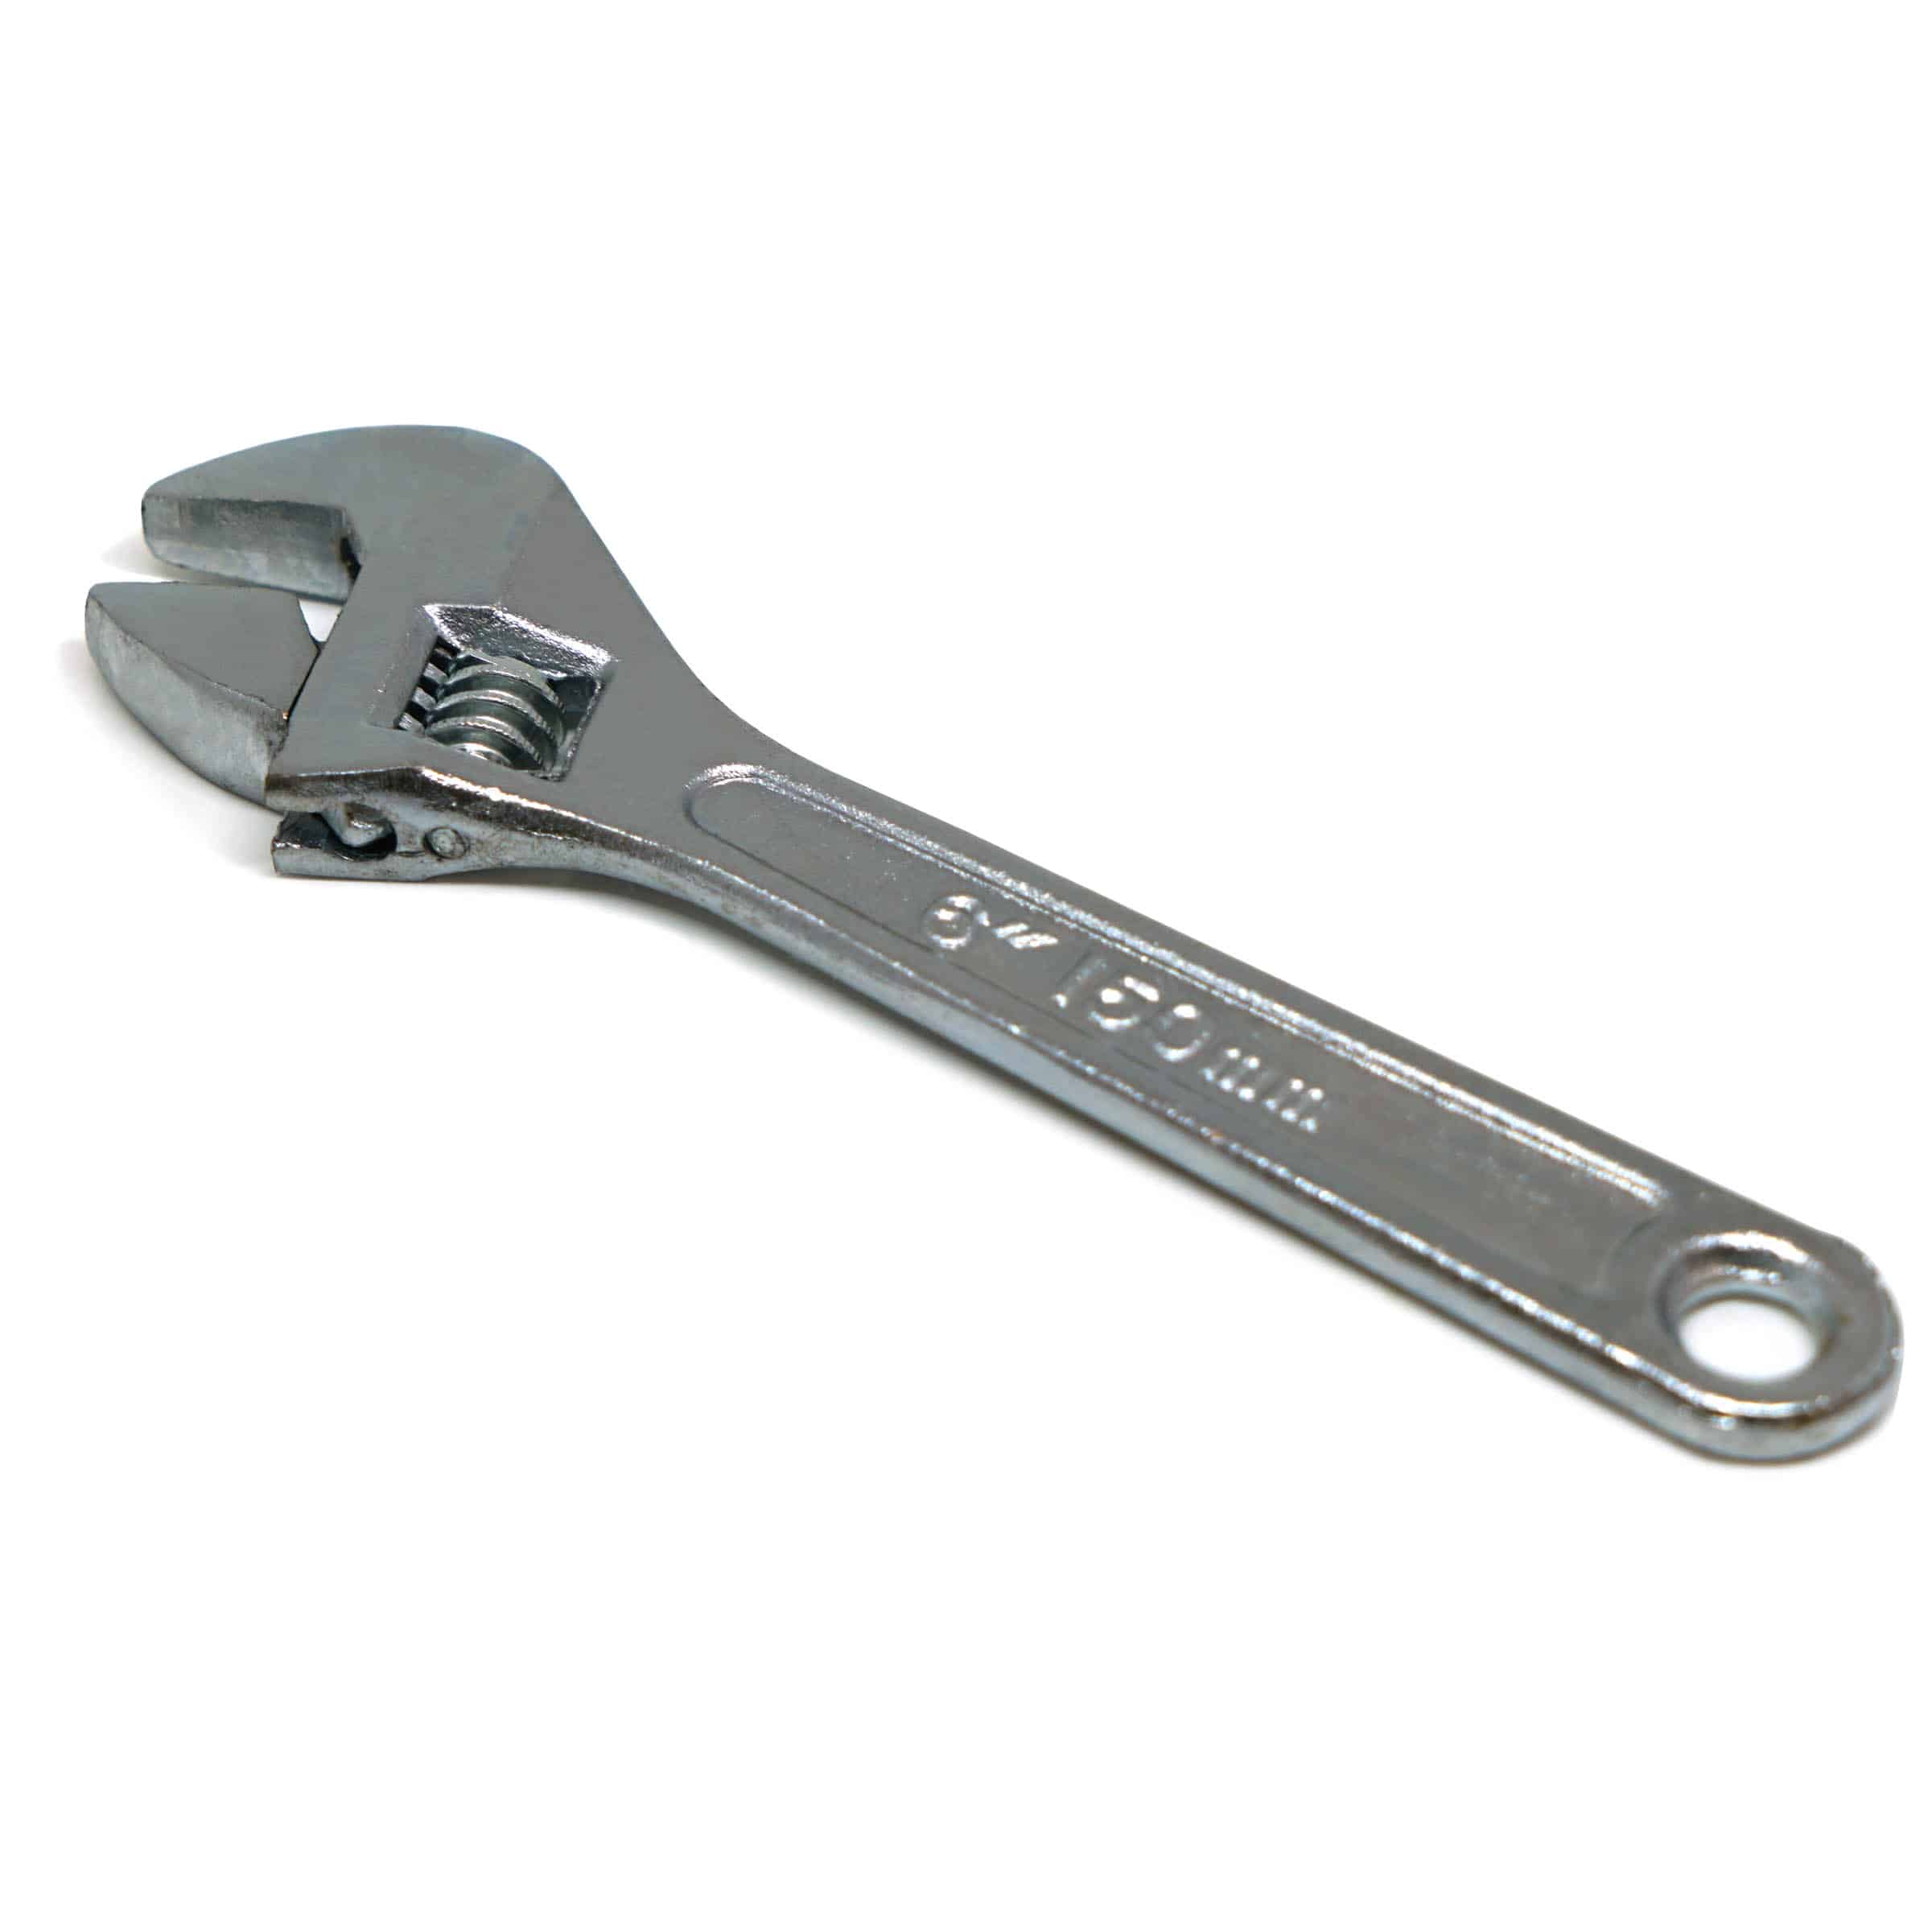 Wrench - Automotive Accessories